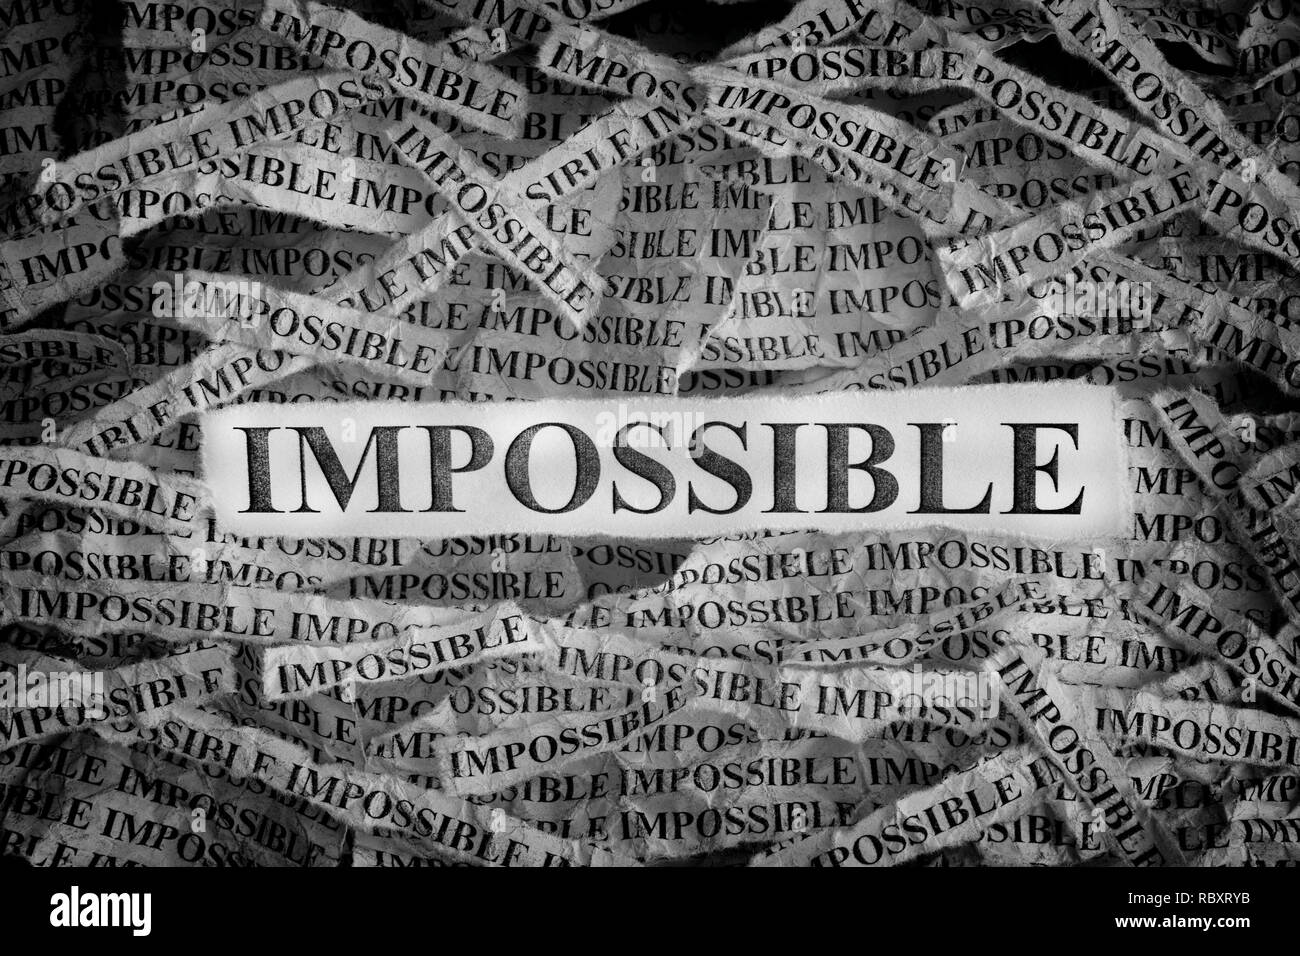 Impossible. Torn pieces of paper with the words Impossible. Concept image. Black and White. Close up. Stock Photo